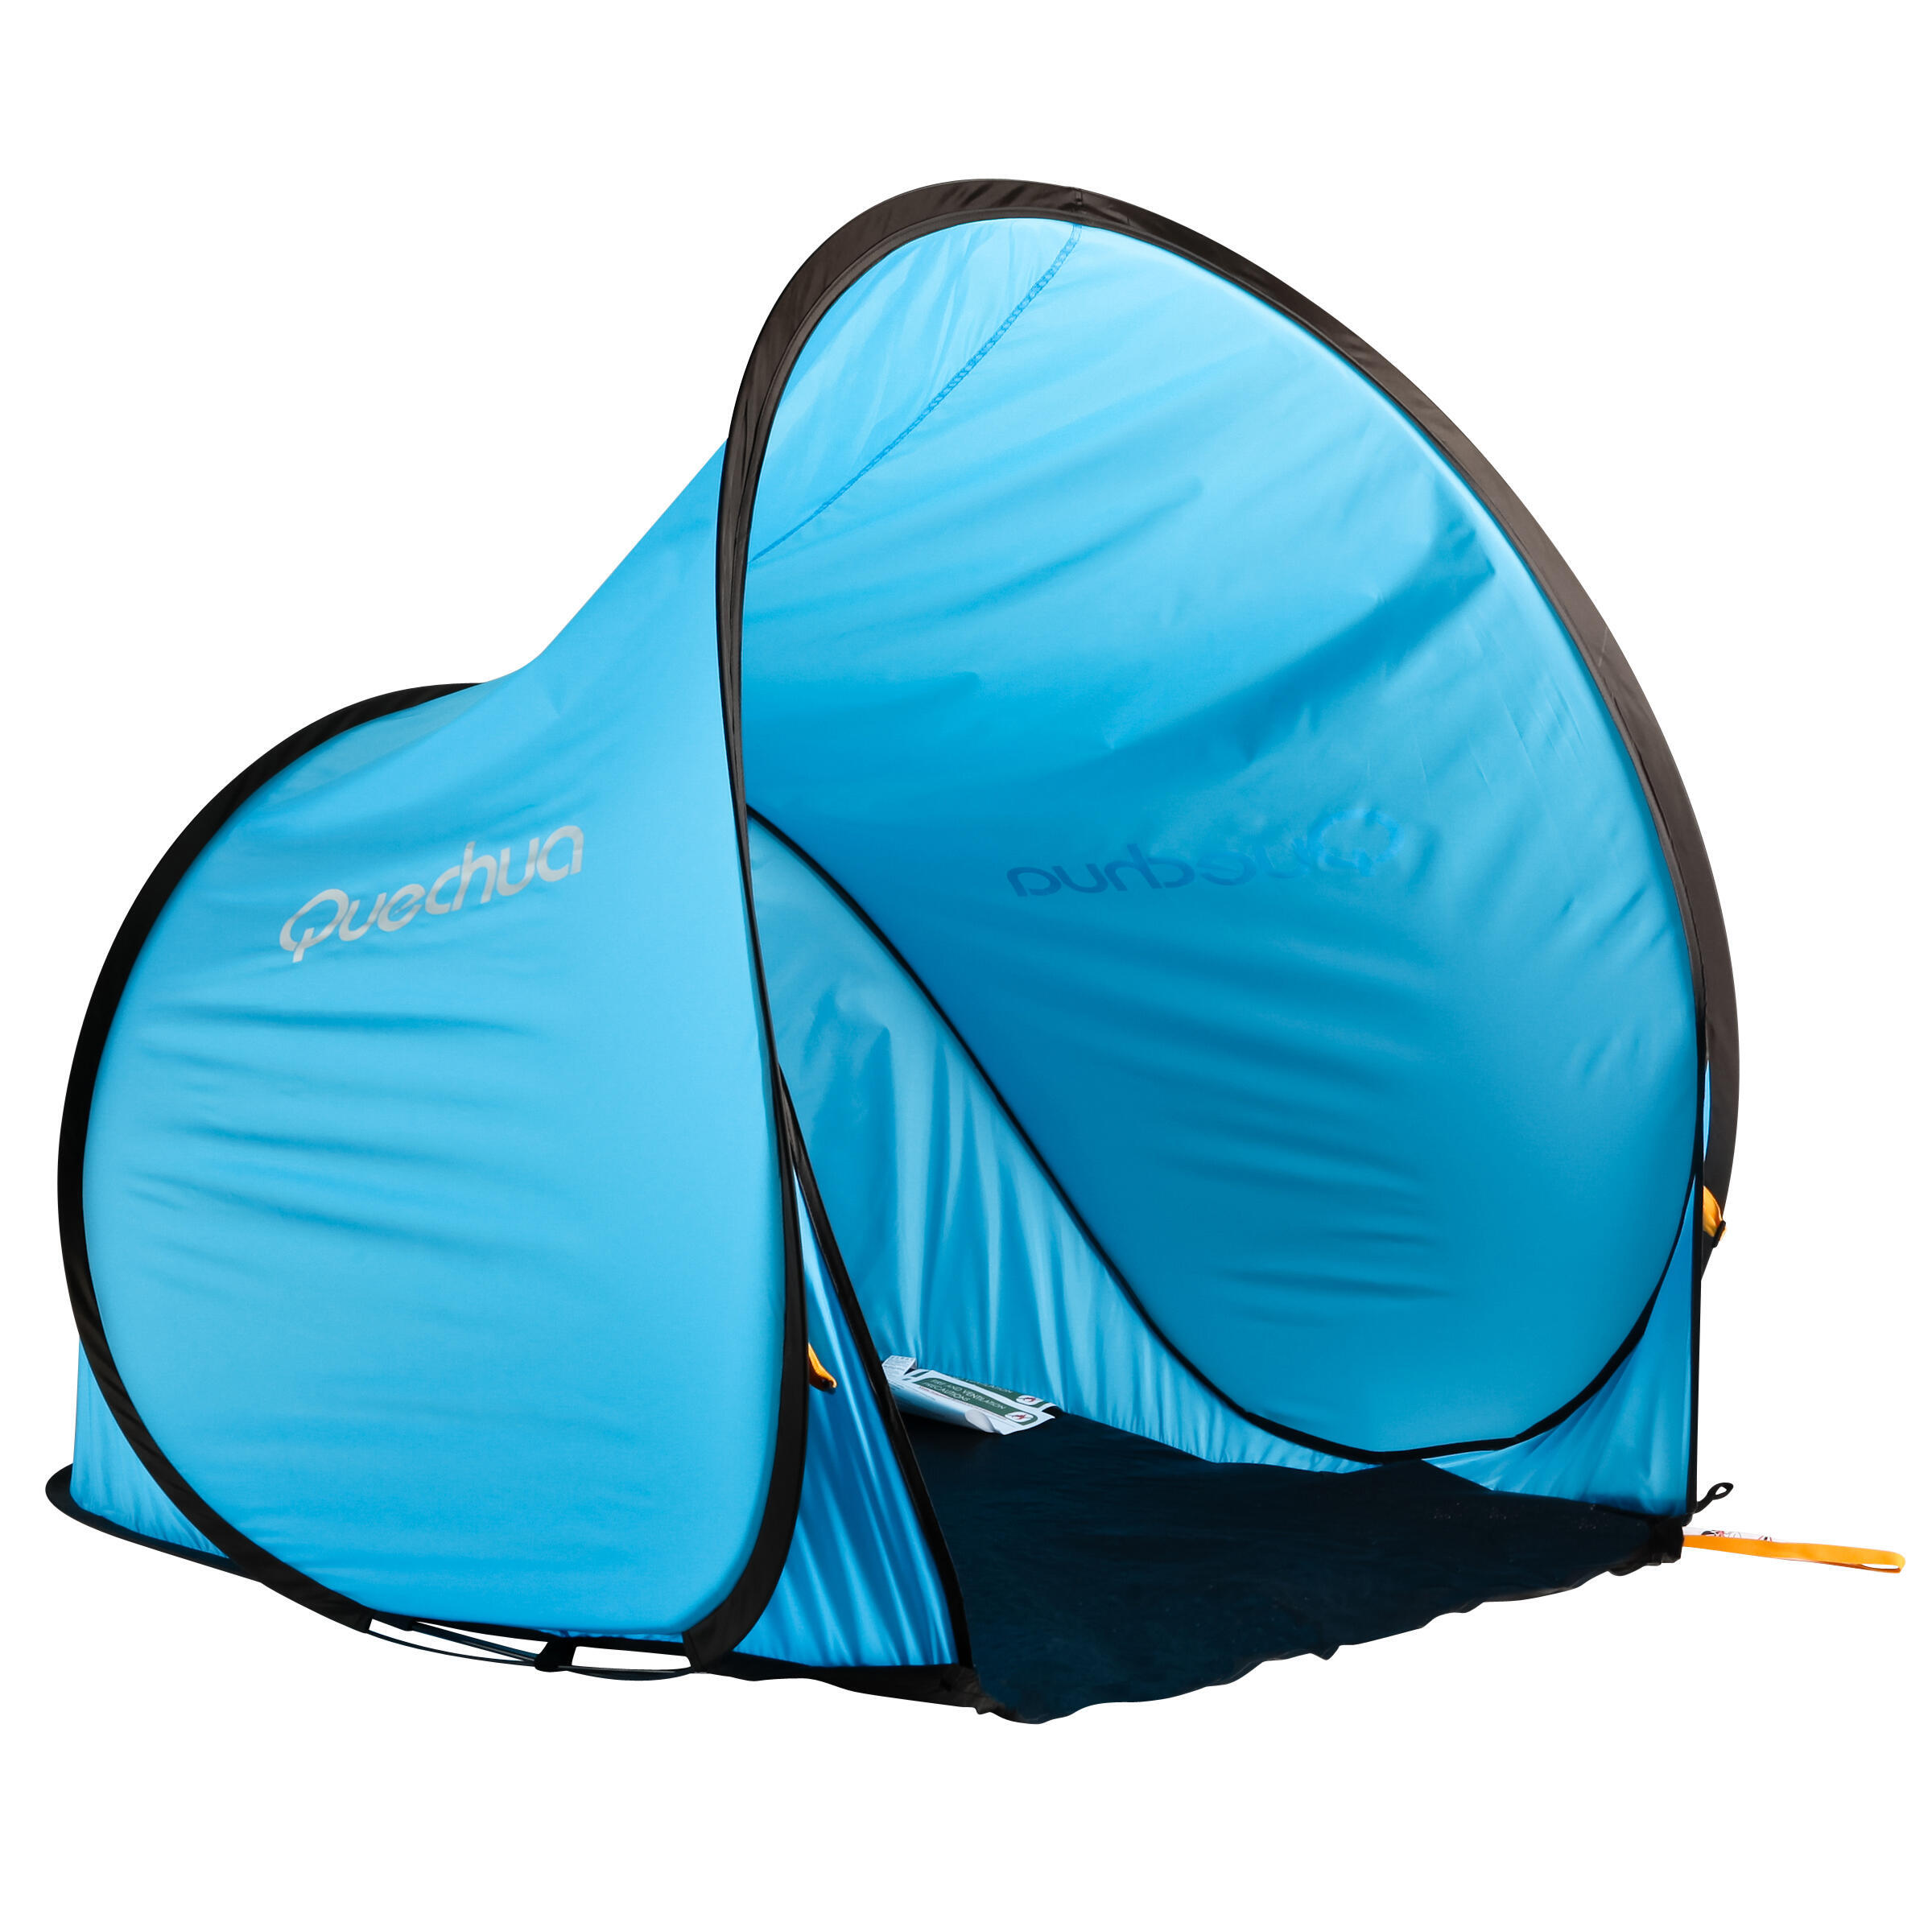 Camping Shelter 2 Seconds 1 Adult Or 2 Kids Quechua Decathlon